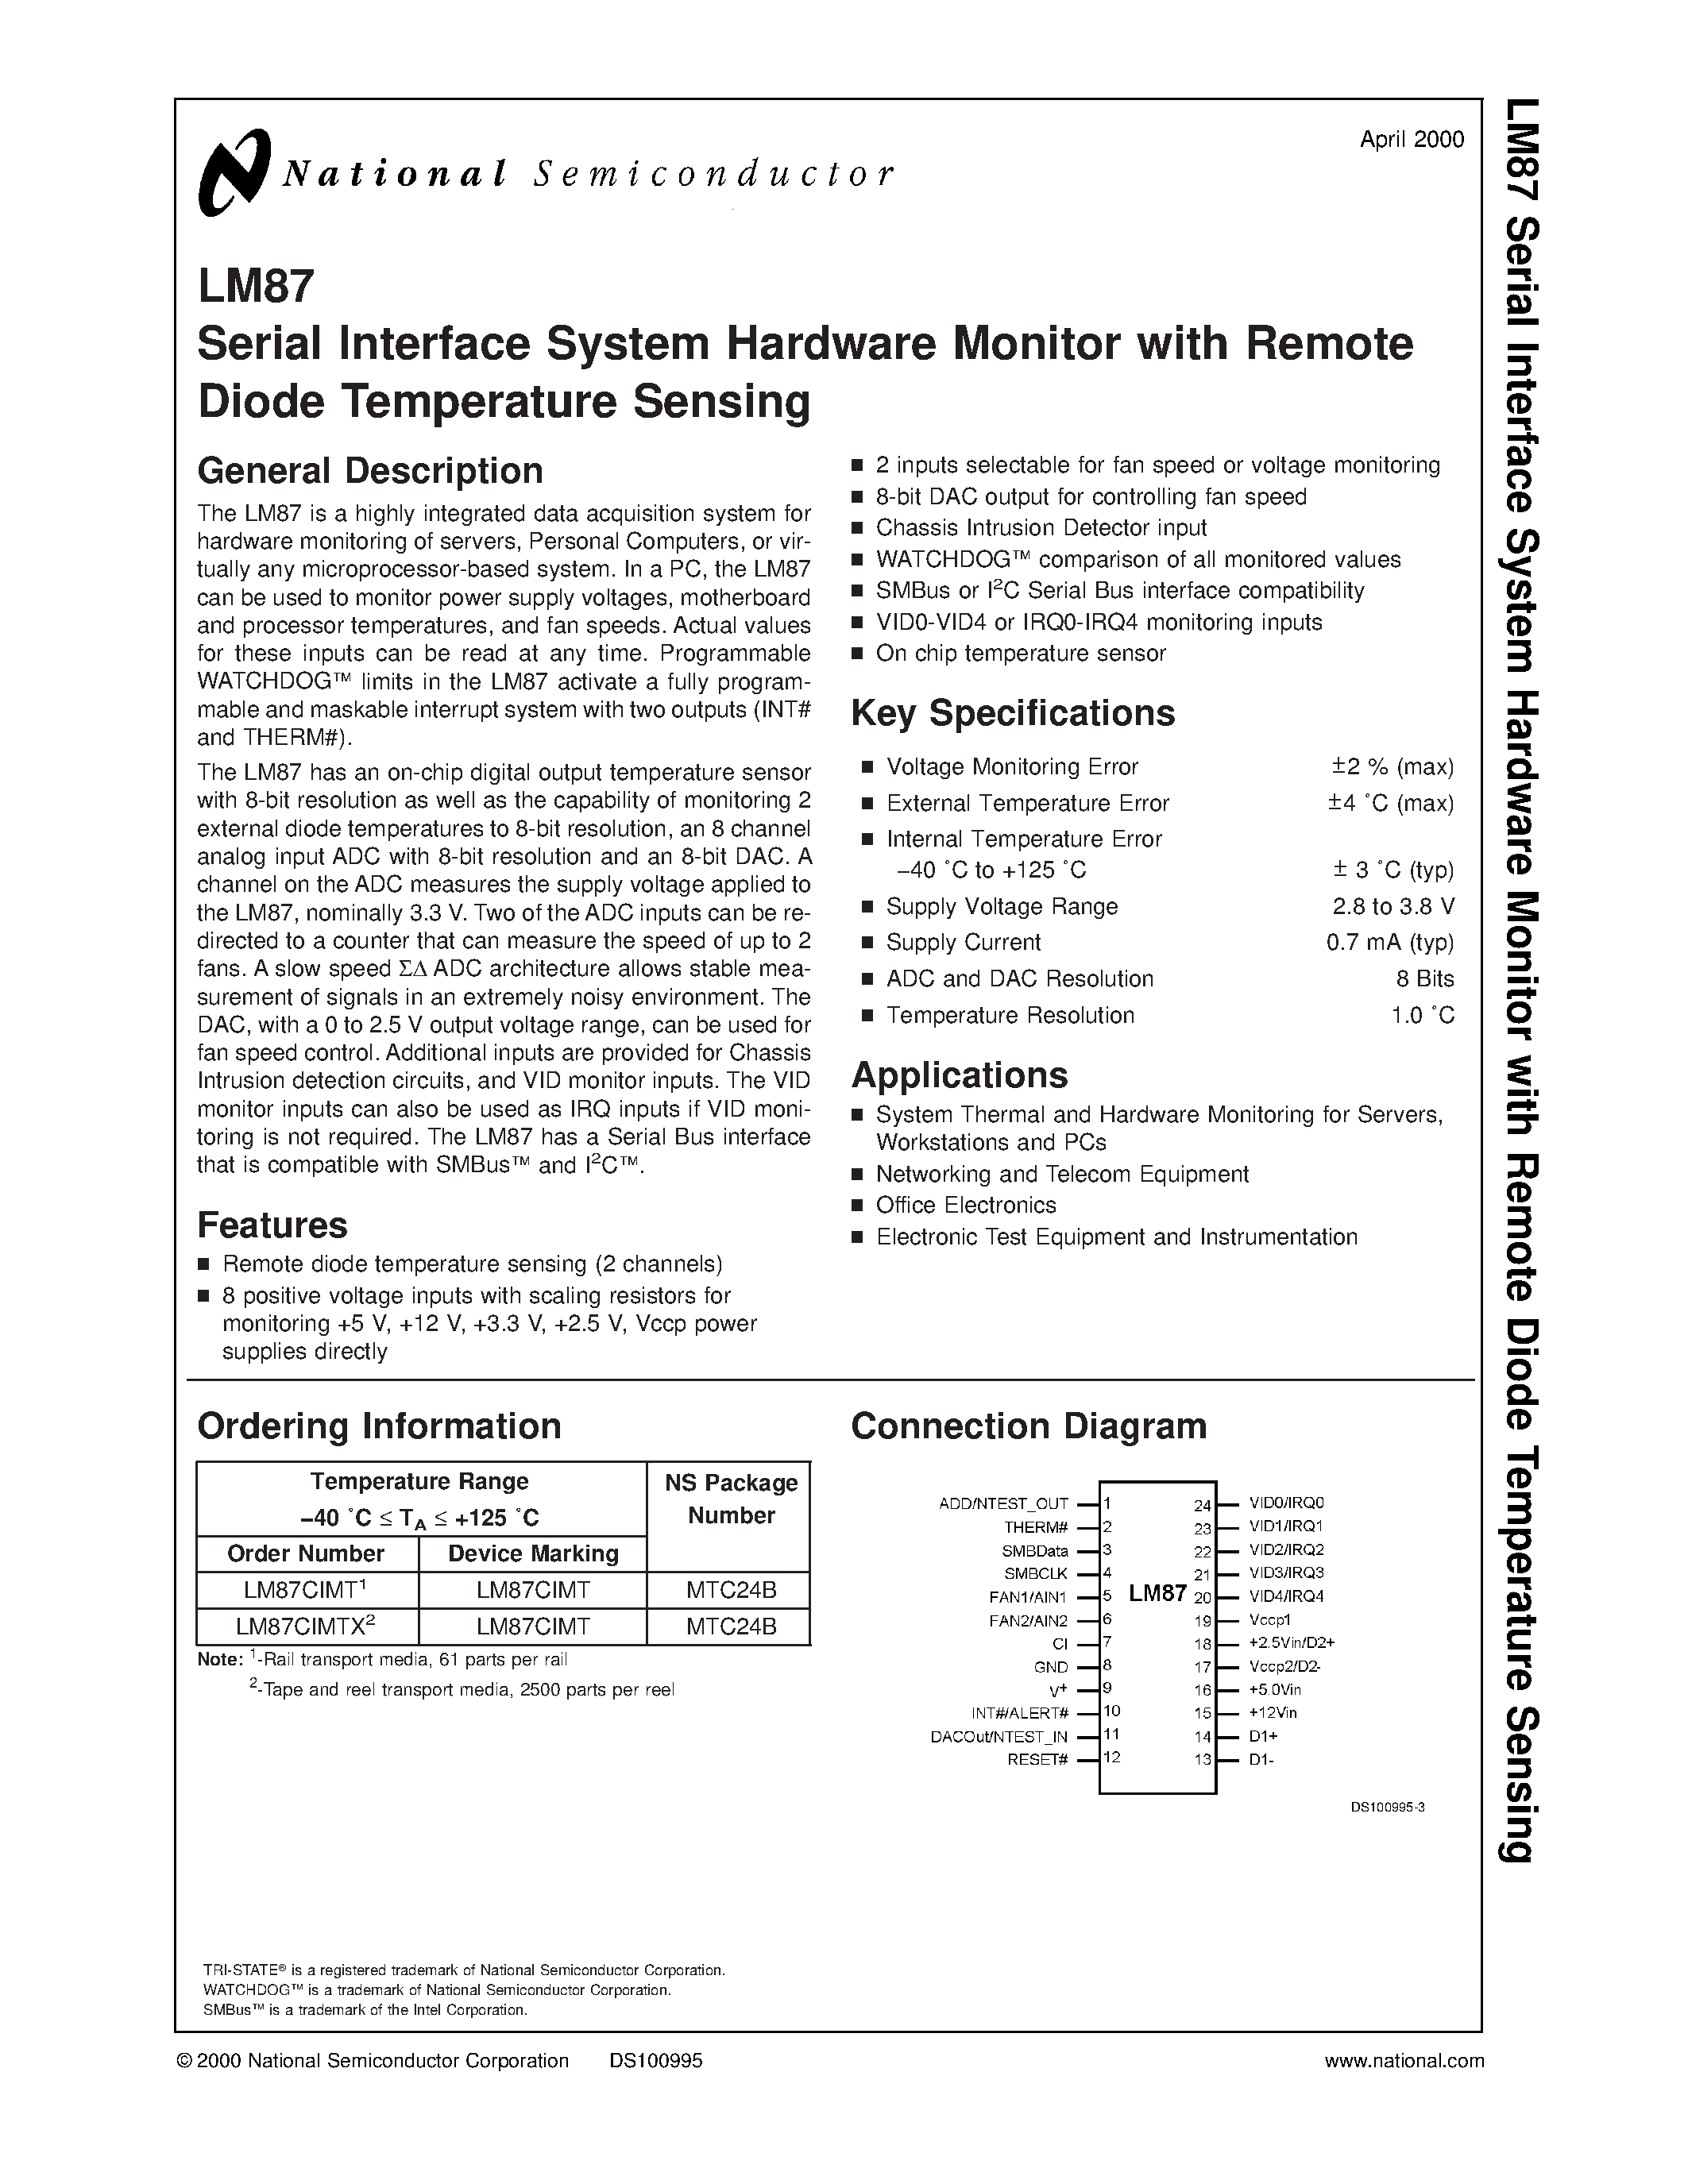 Datasheet LM87CIMTX2 - Serial Interface System Hardware Monitor with Remote Diode Temperature Sensing page 1